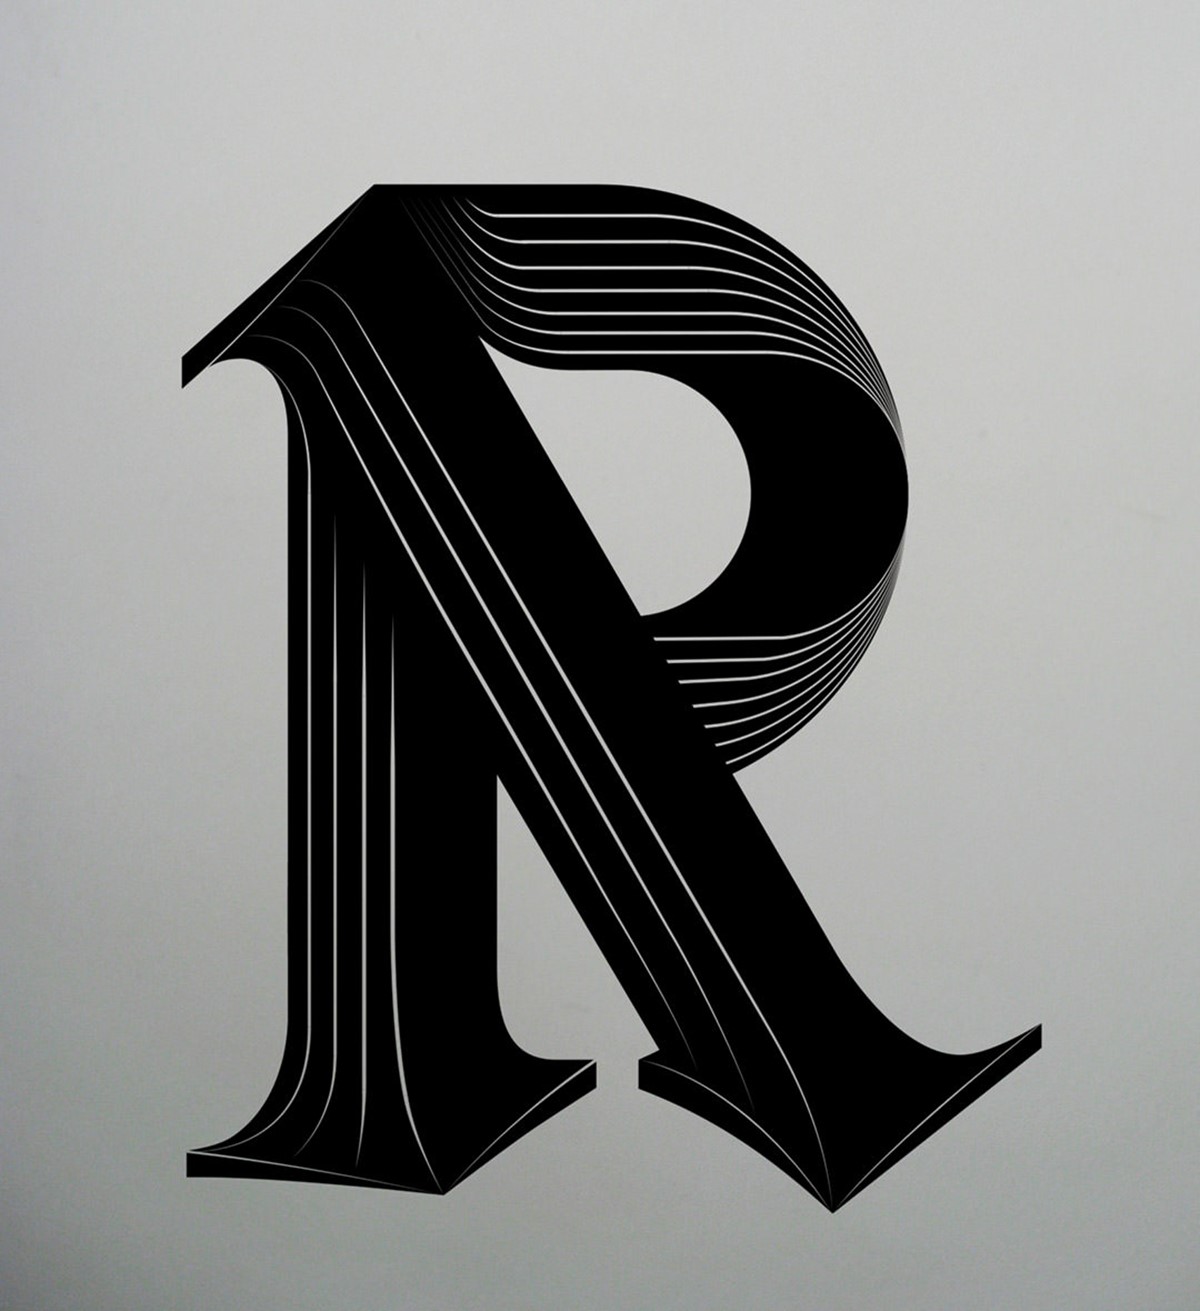 AIGA. Type Tuesday. BLT LTR Series. Typographic experiment: letter R. Design by Superfried.